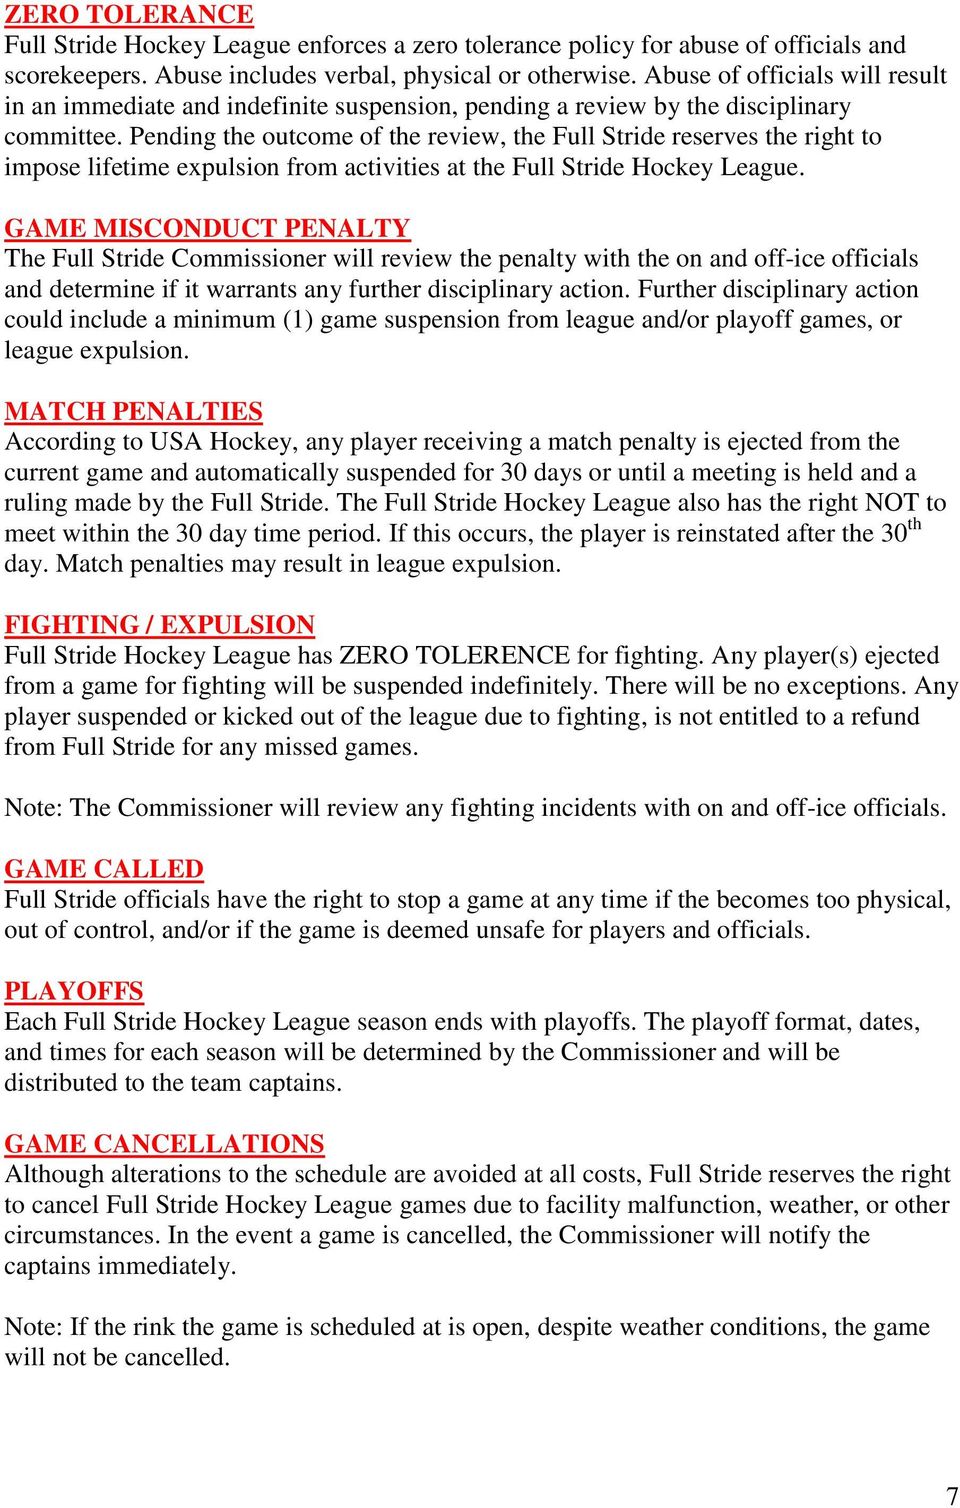 Pending the outcome of the review, the Full Stride reserves the right to impose lifetime expulsion from activities at the Full Stride Hockey League.